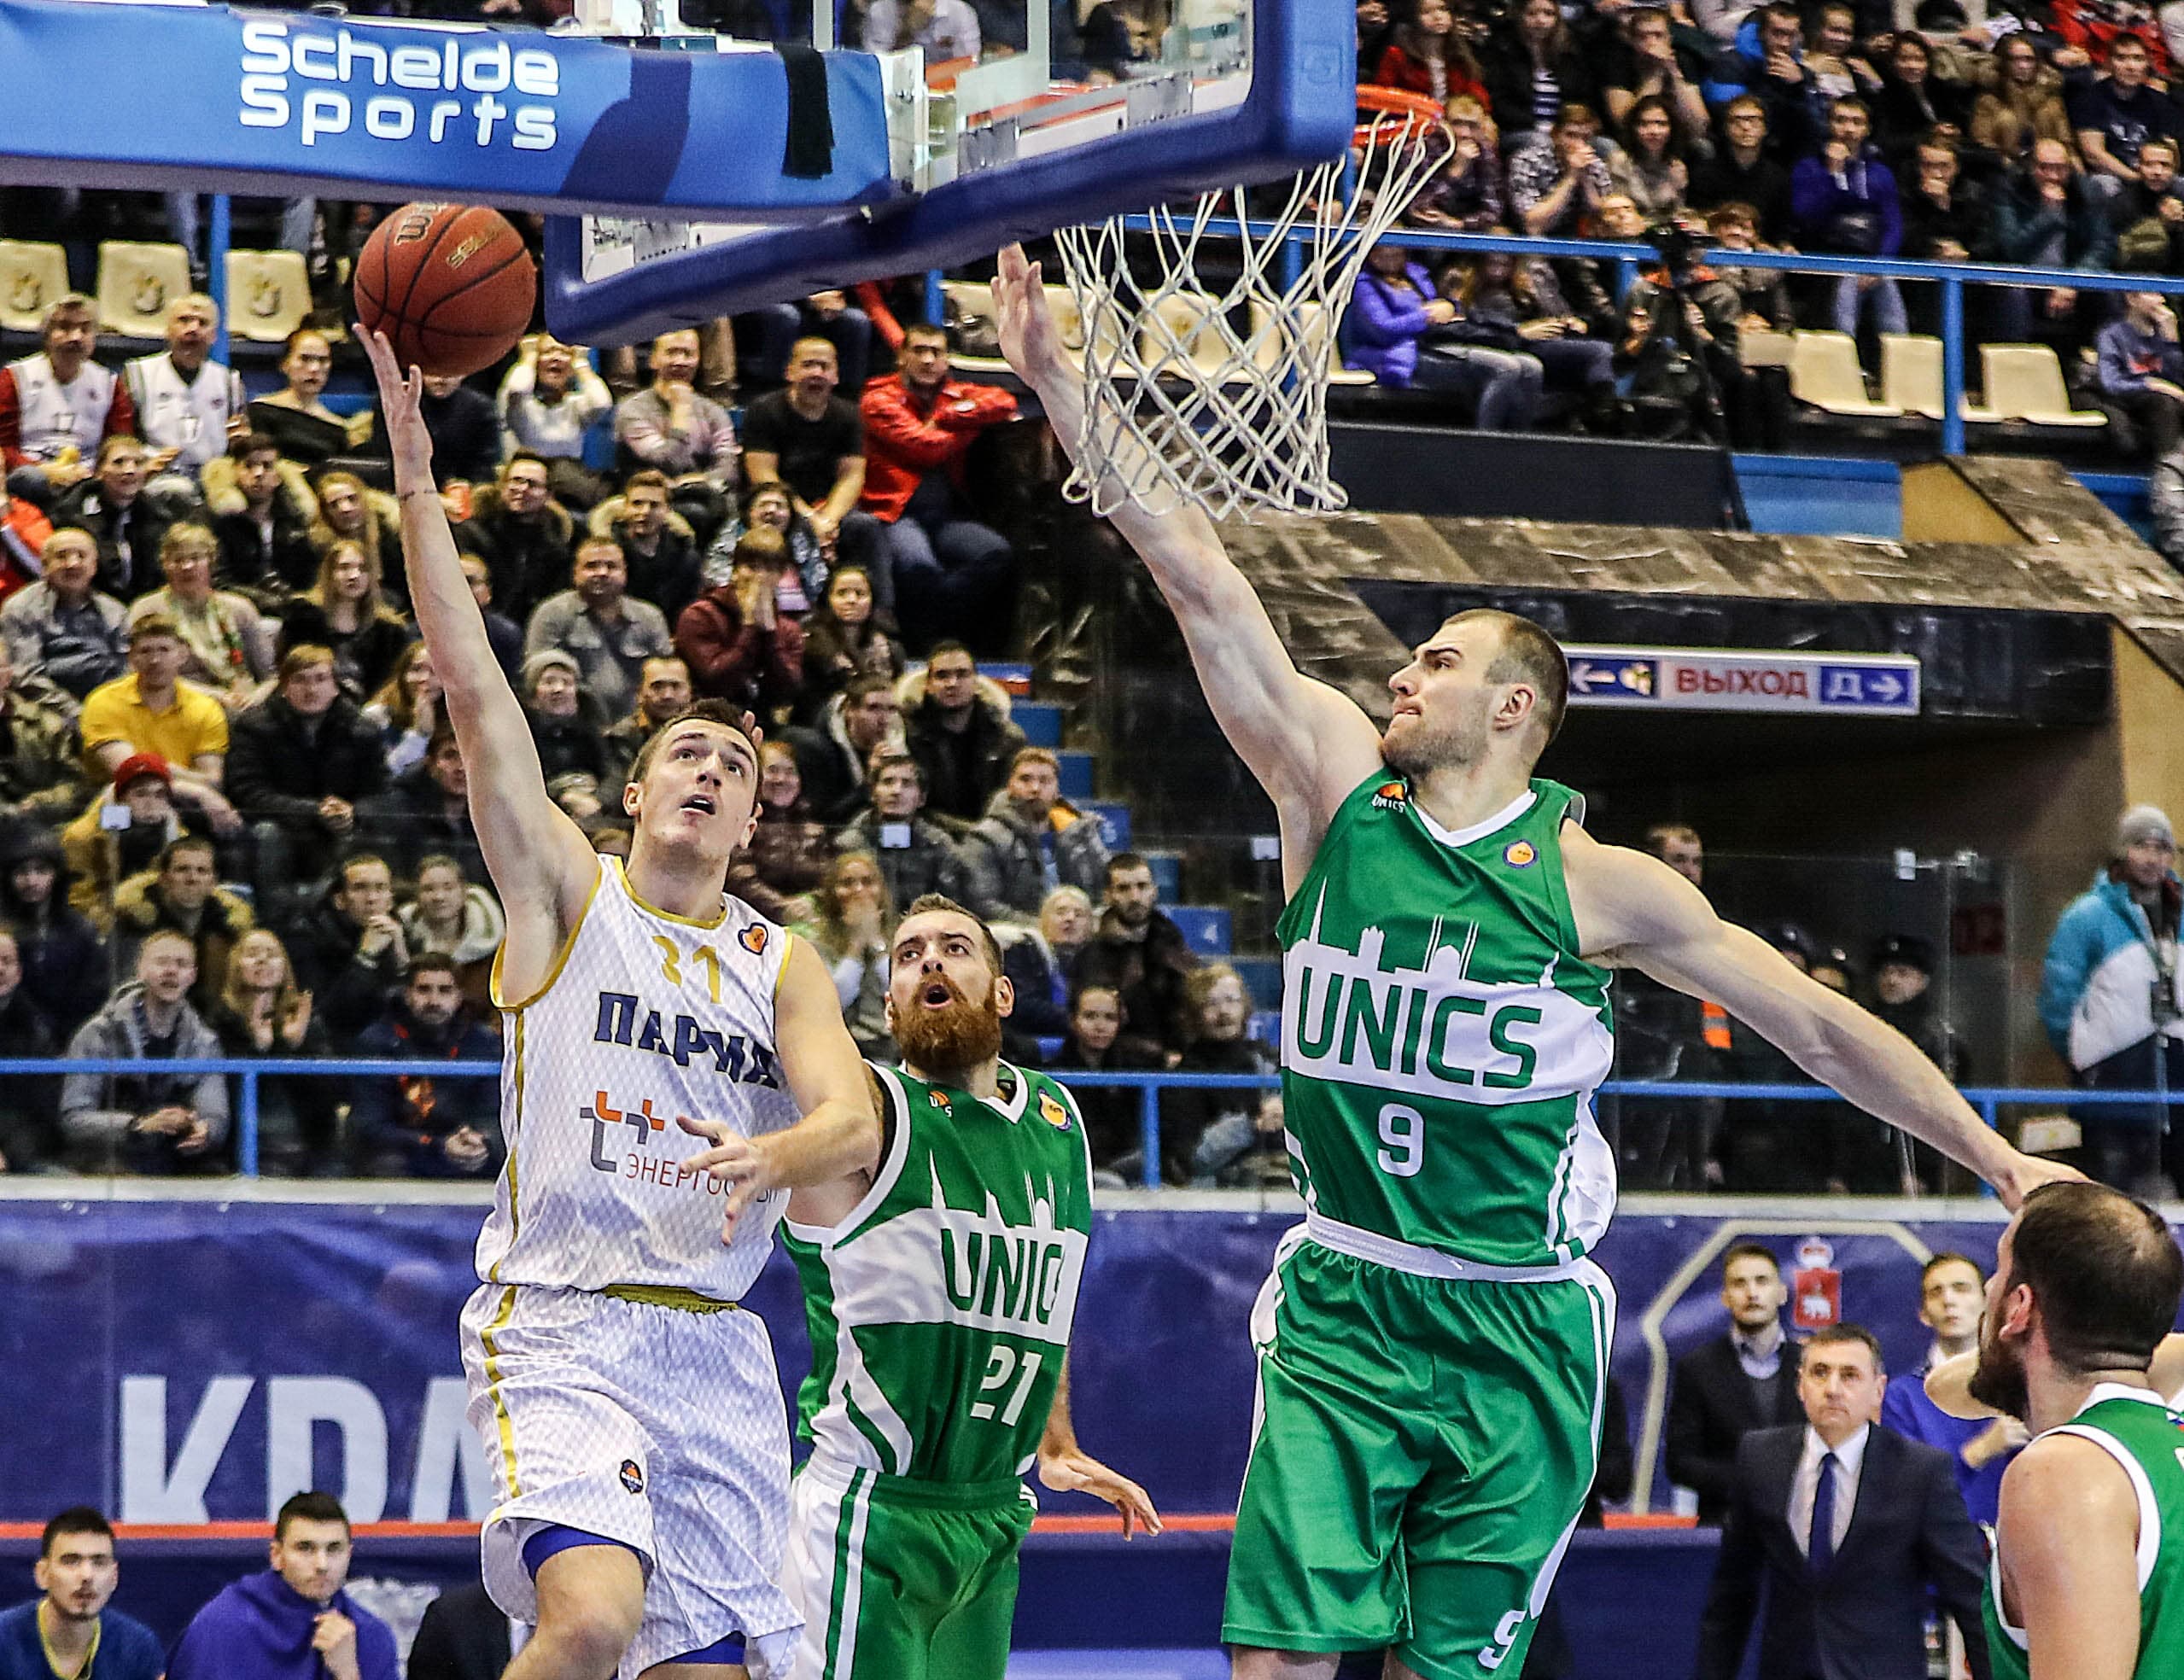 Andjusic’s 40-Point Game Gives Him Player Of The Week Award